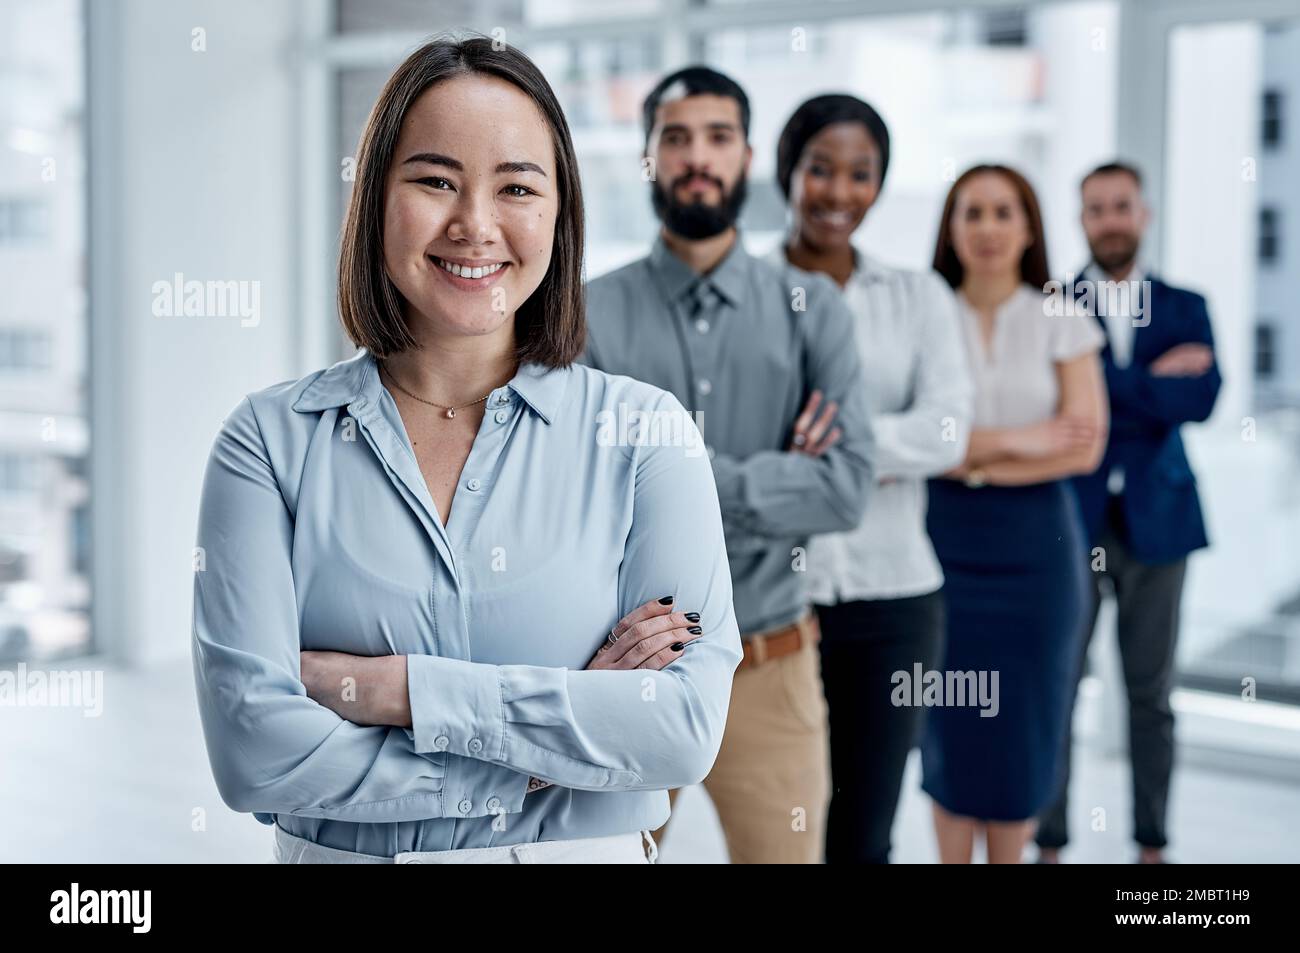 Im so thankful for an amazing team behind me. Portrait of a businesswoman standing in an office with her colleagues in the background. Stock Photo